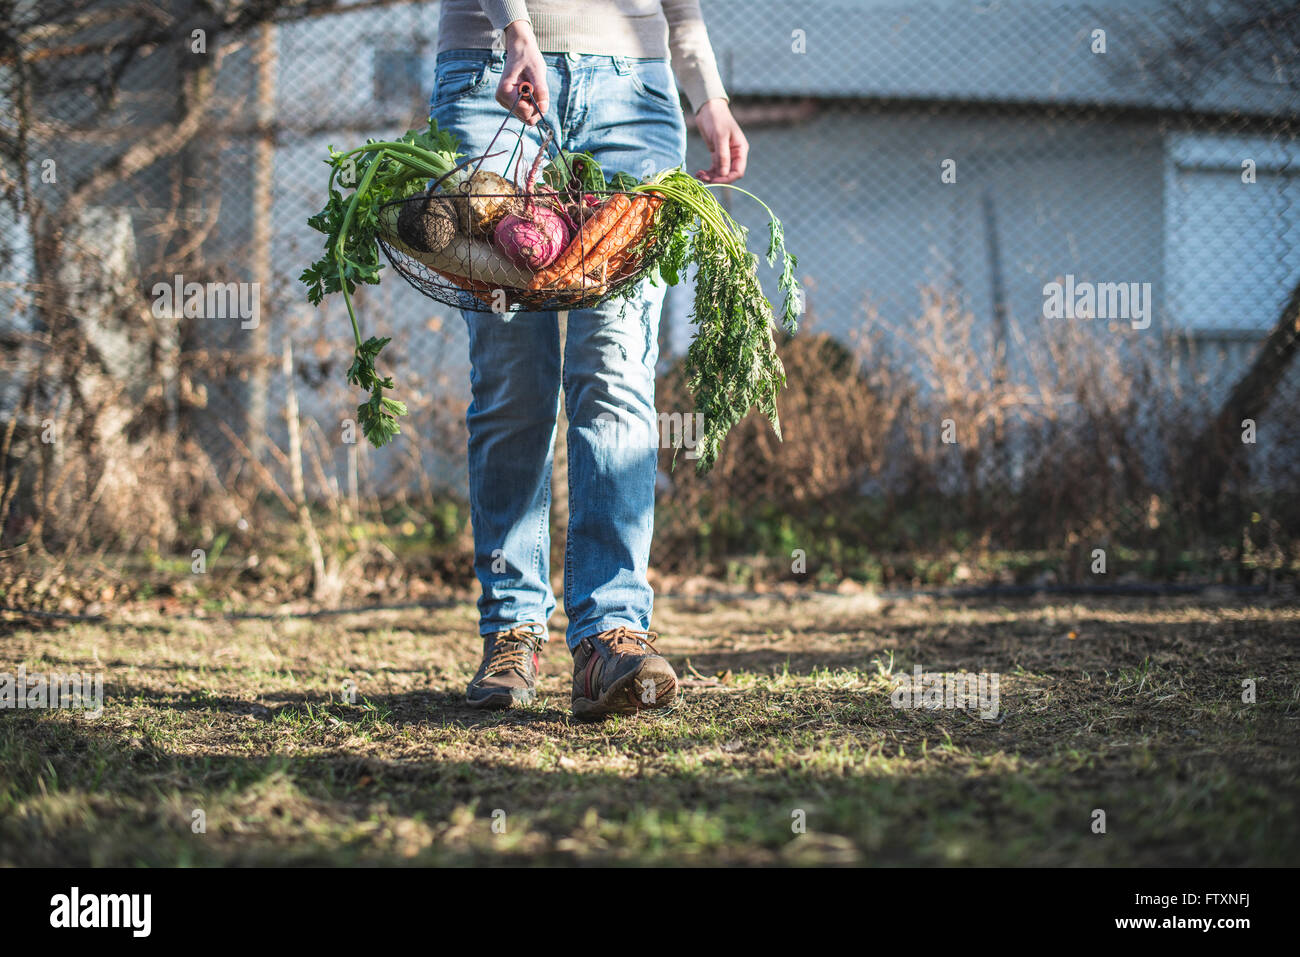 Woman carrying basket of fresh vegetables Stock Photo